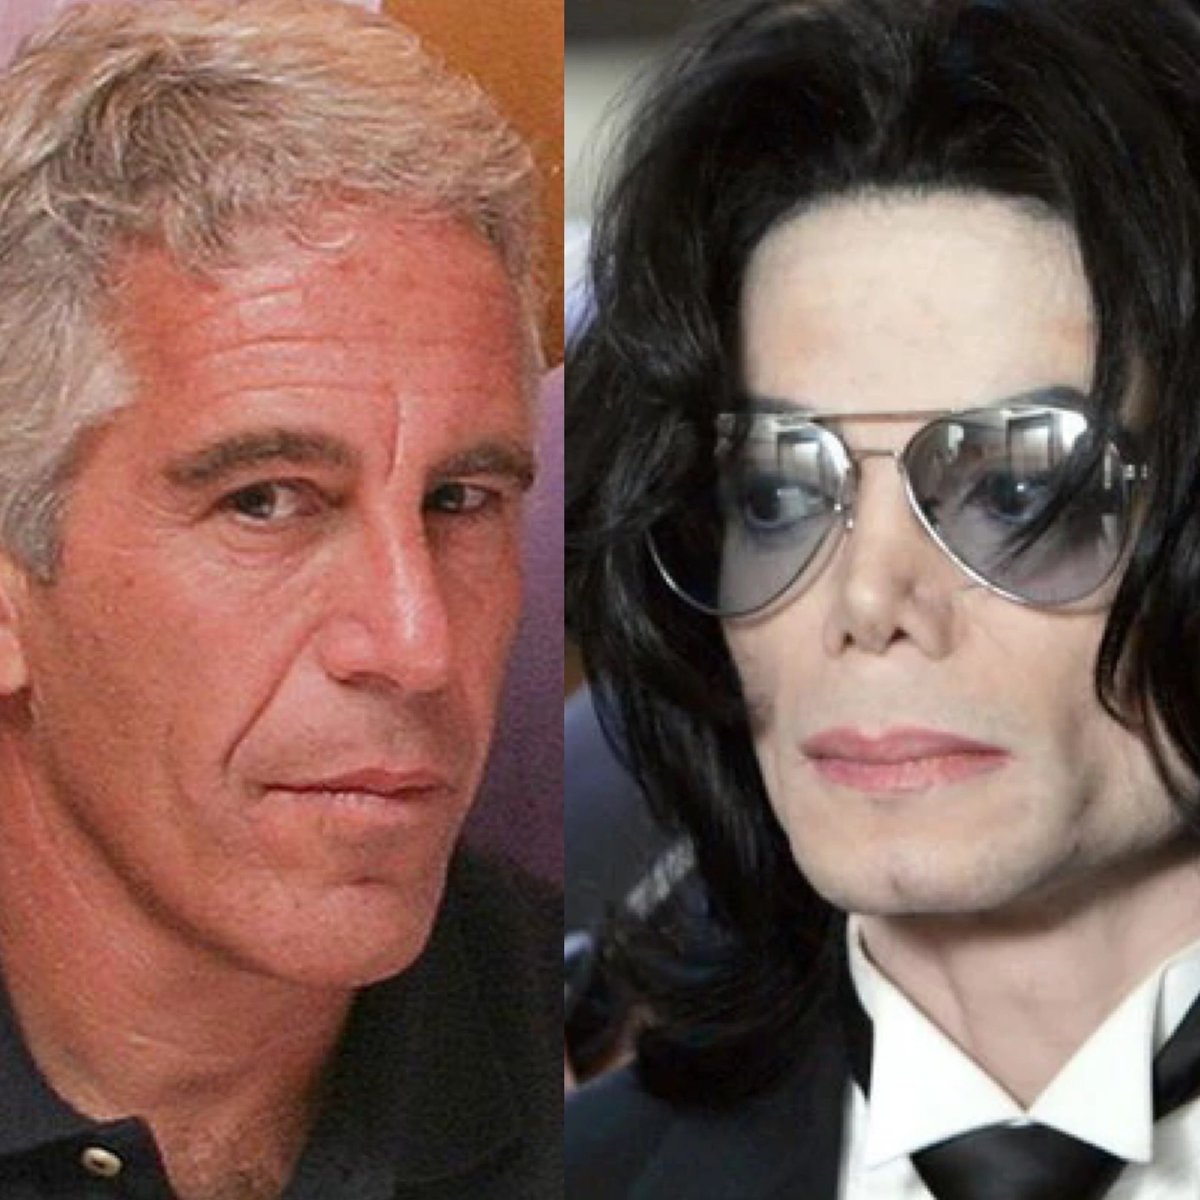 Anyone else notice that Michael Jackson has not been mentioned once with any connection to Jeffrey Epstein?! 

The media, Oprah, Ellen, Jimmy Kimmel etc had you all believing Michael Jackson was the biggest paedophile in the world.

Michael Jackson was used all this time as a